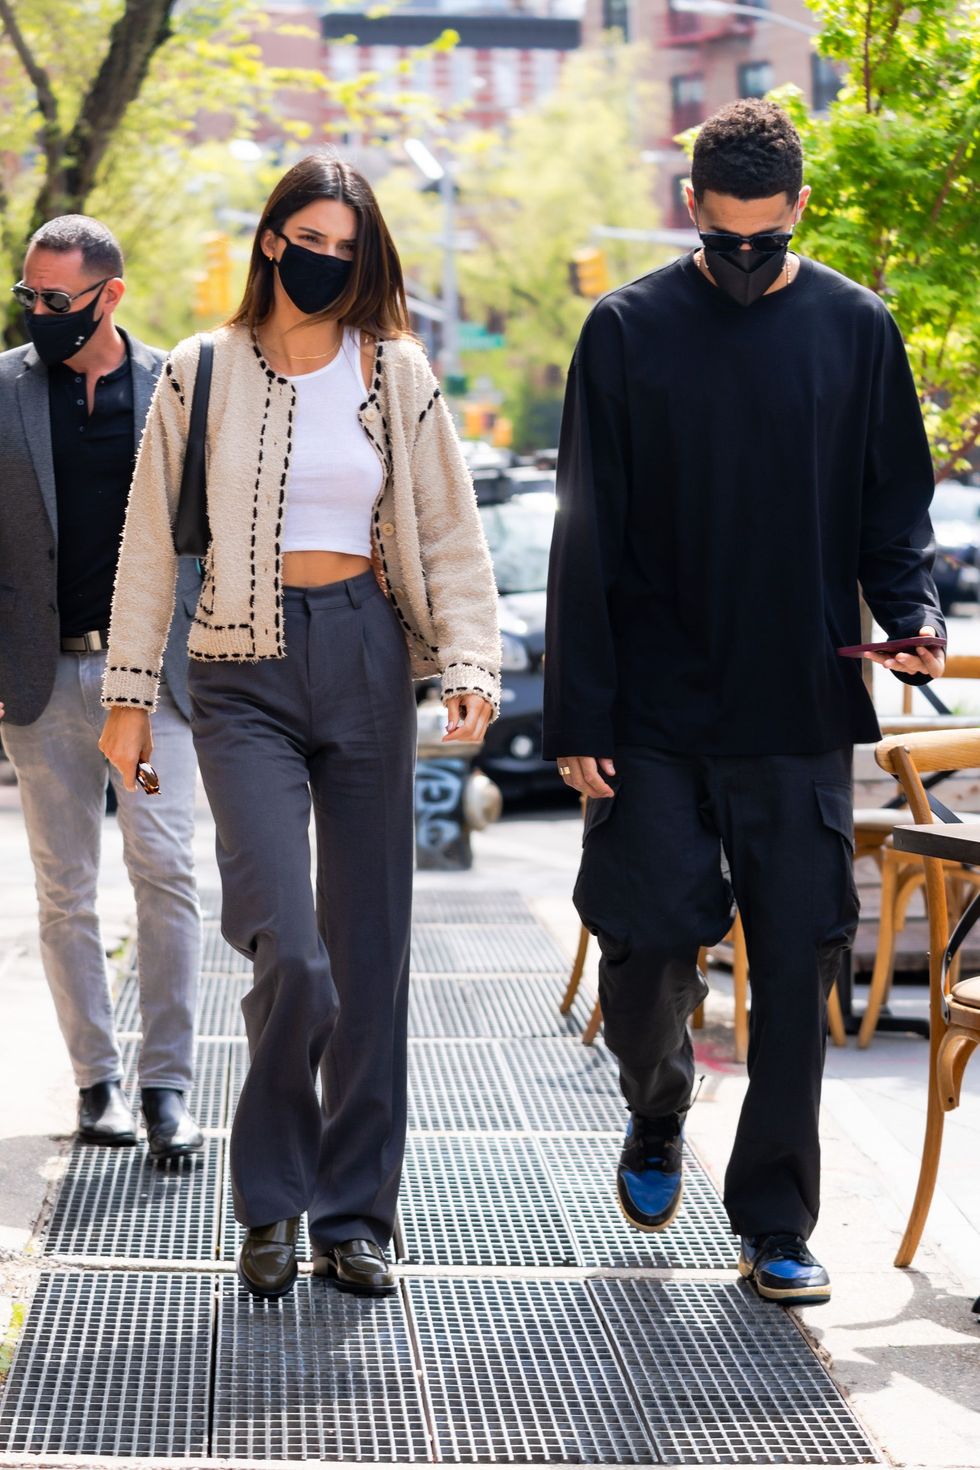 kendall jenner and devin booker in new york city on april 24, 2021